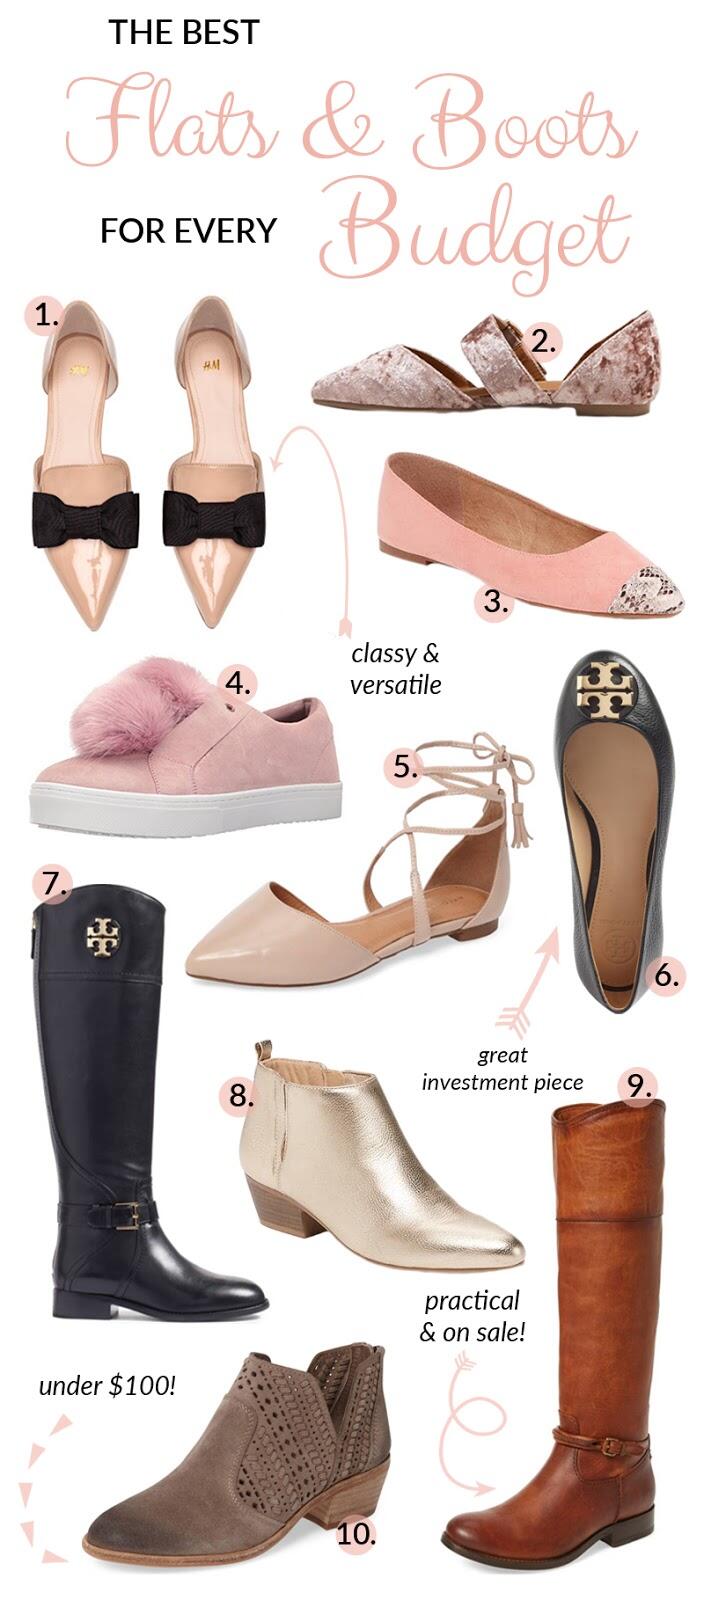 The Best Flats \u0026 Boots for Every Budget 